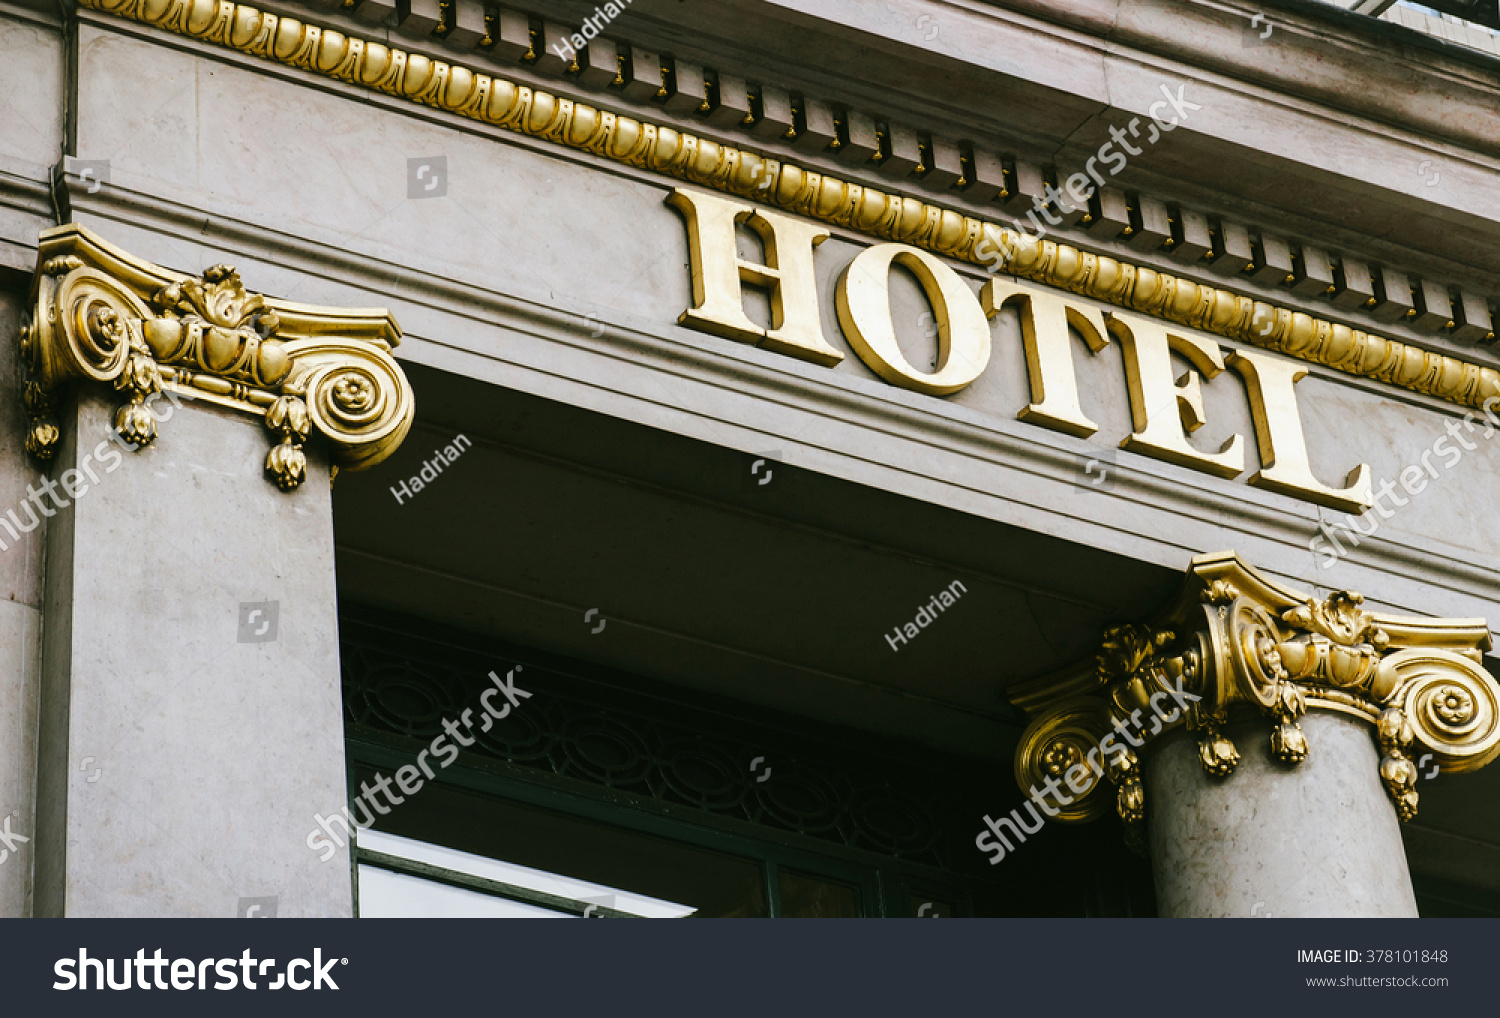 Hotel word with golden letters on luxury hotel with beautiful columns #378101848